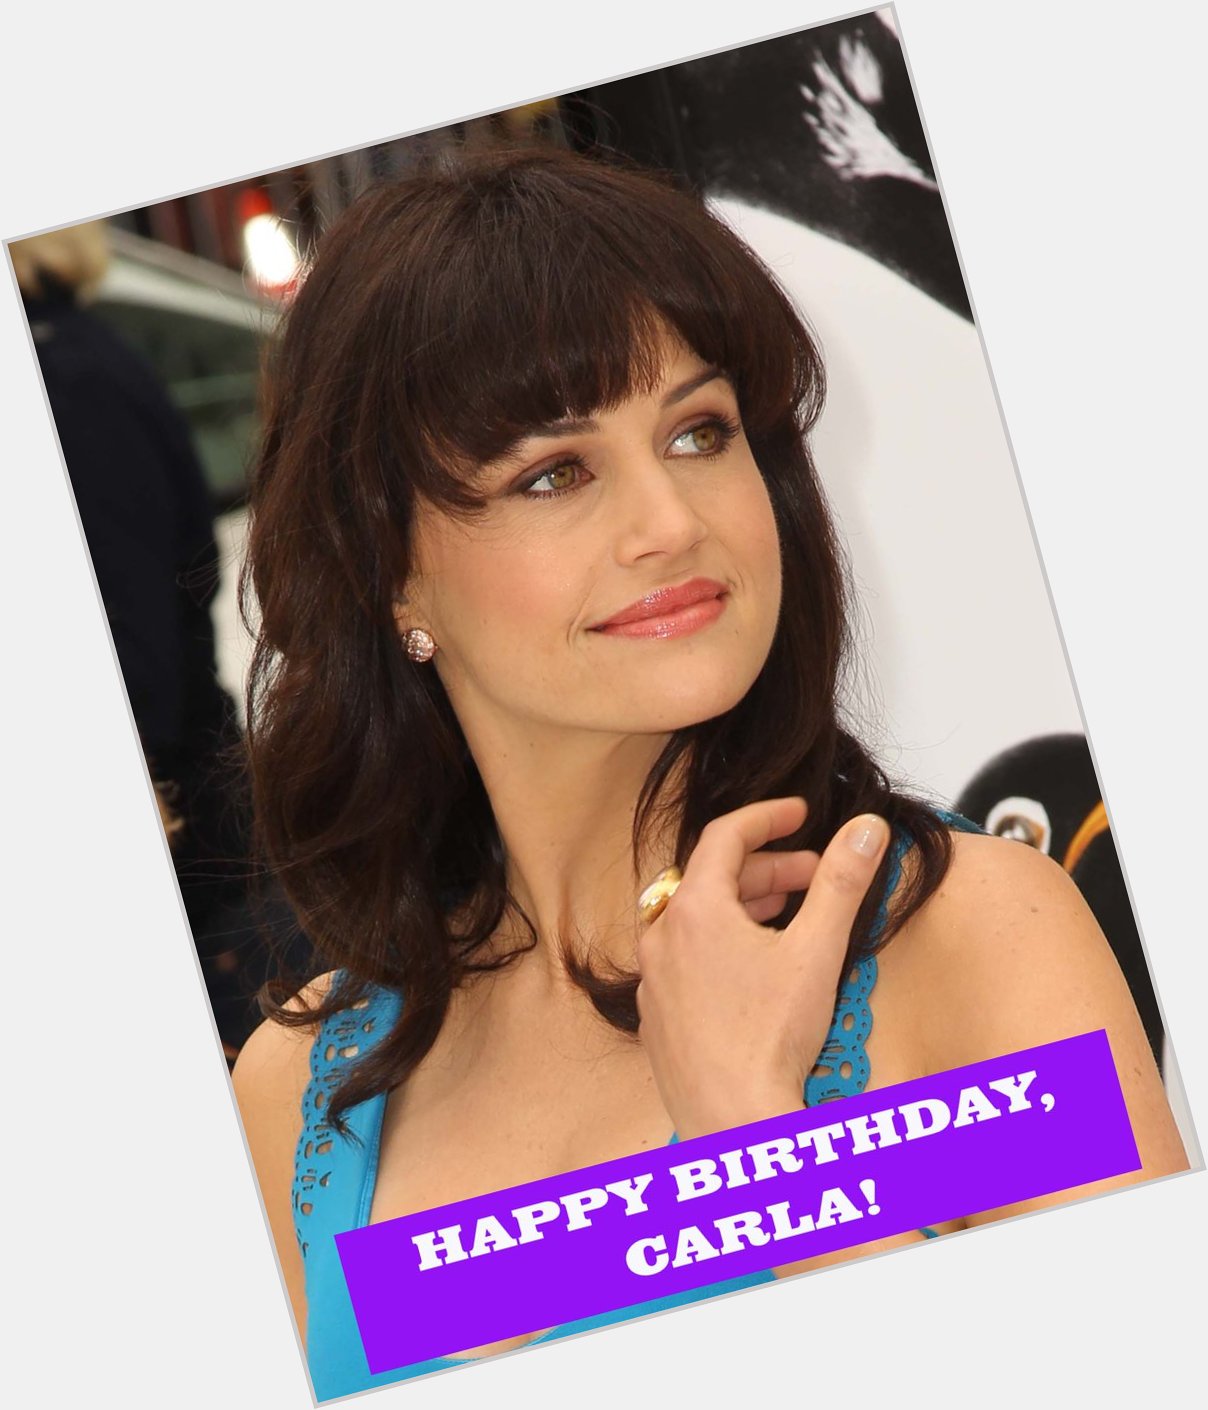 Movie Loft wishing a Happy Birthday to the incredibly talented and sexy, Carla Gugino. 